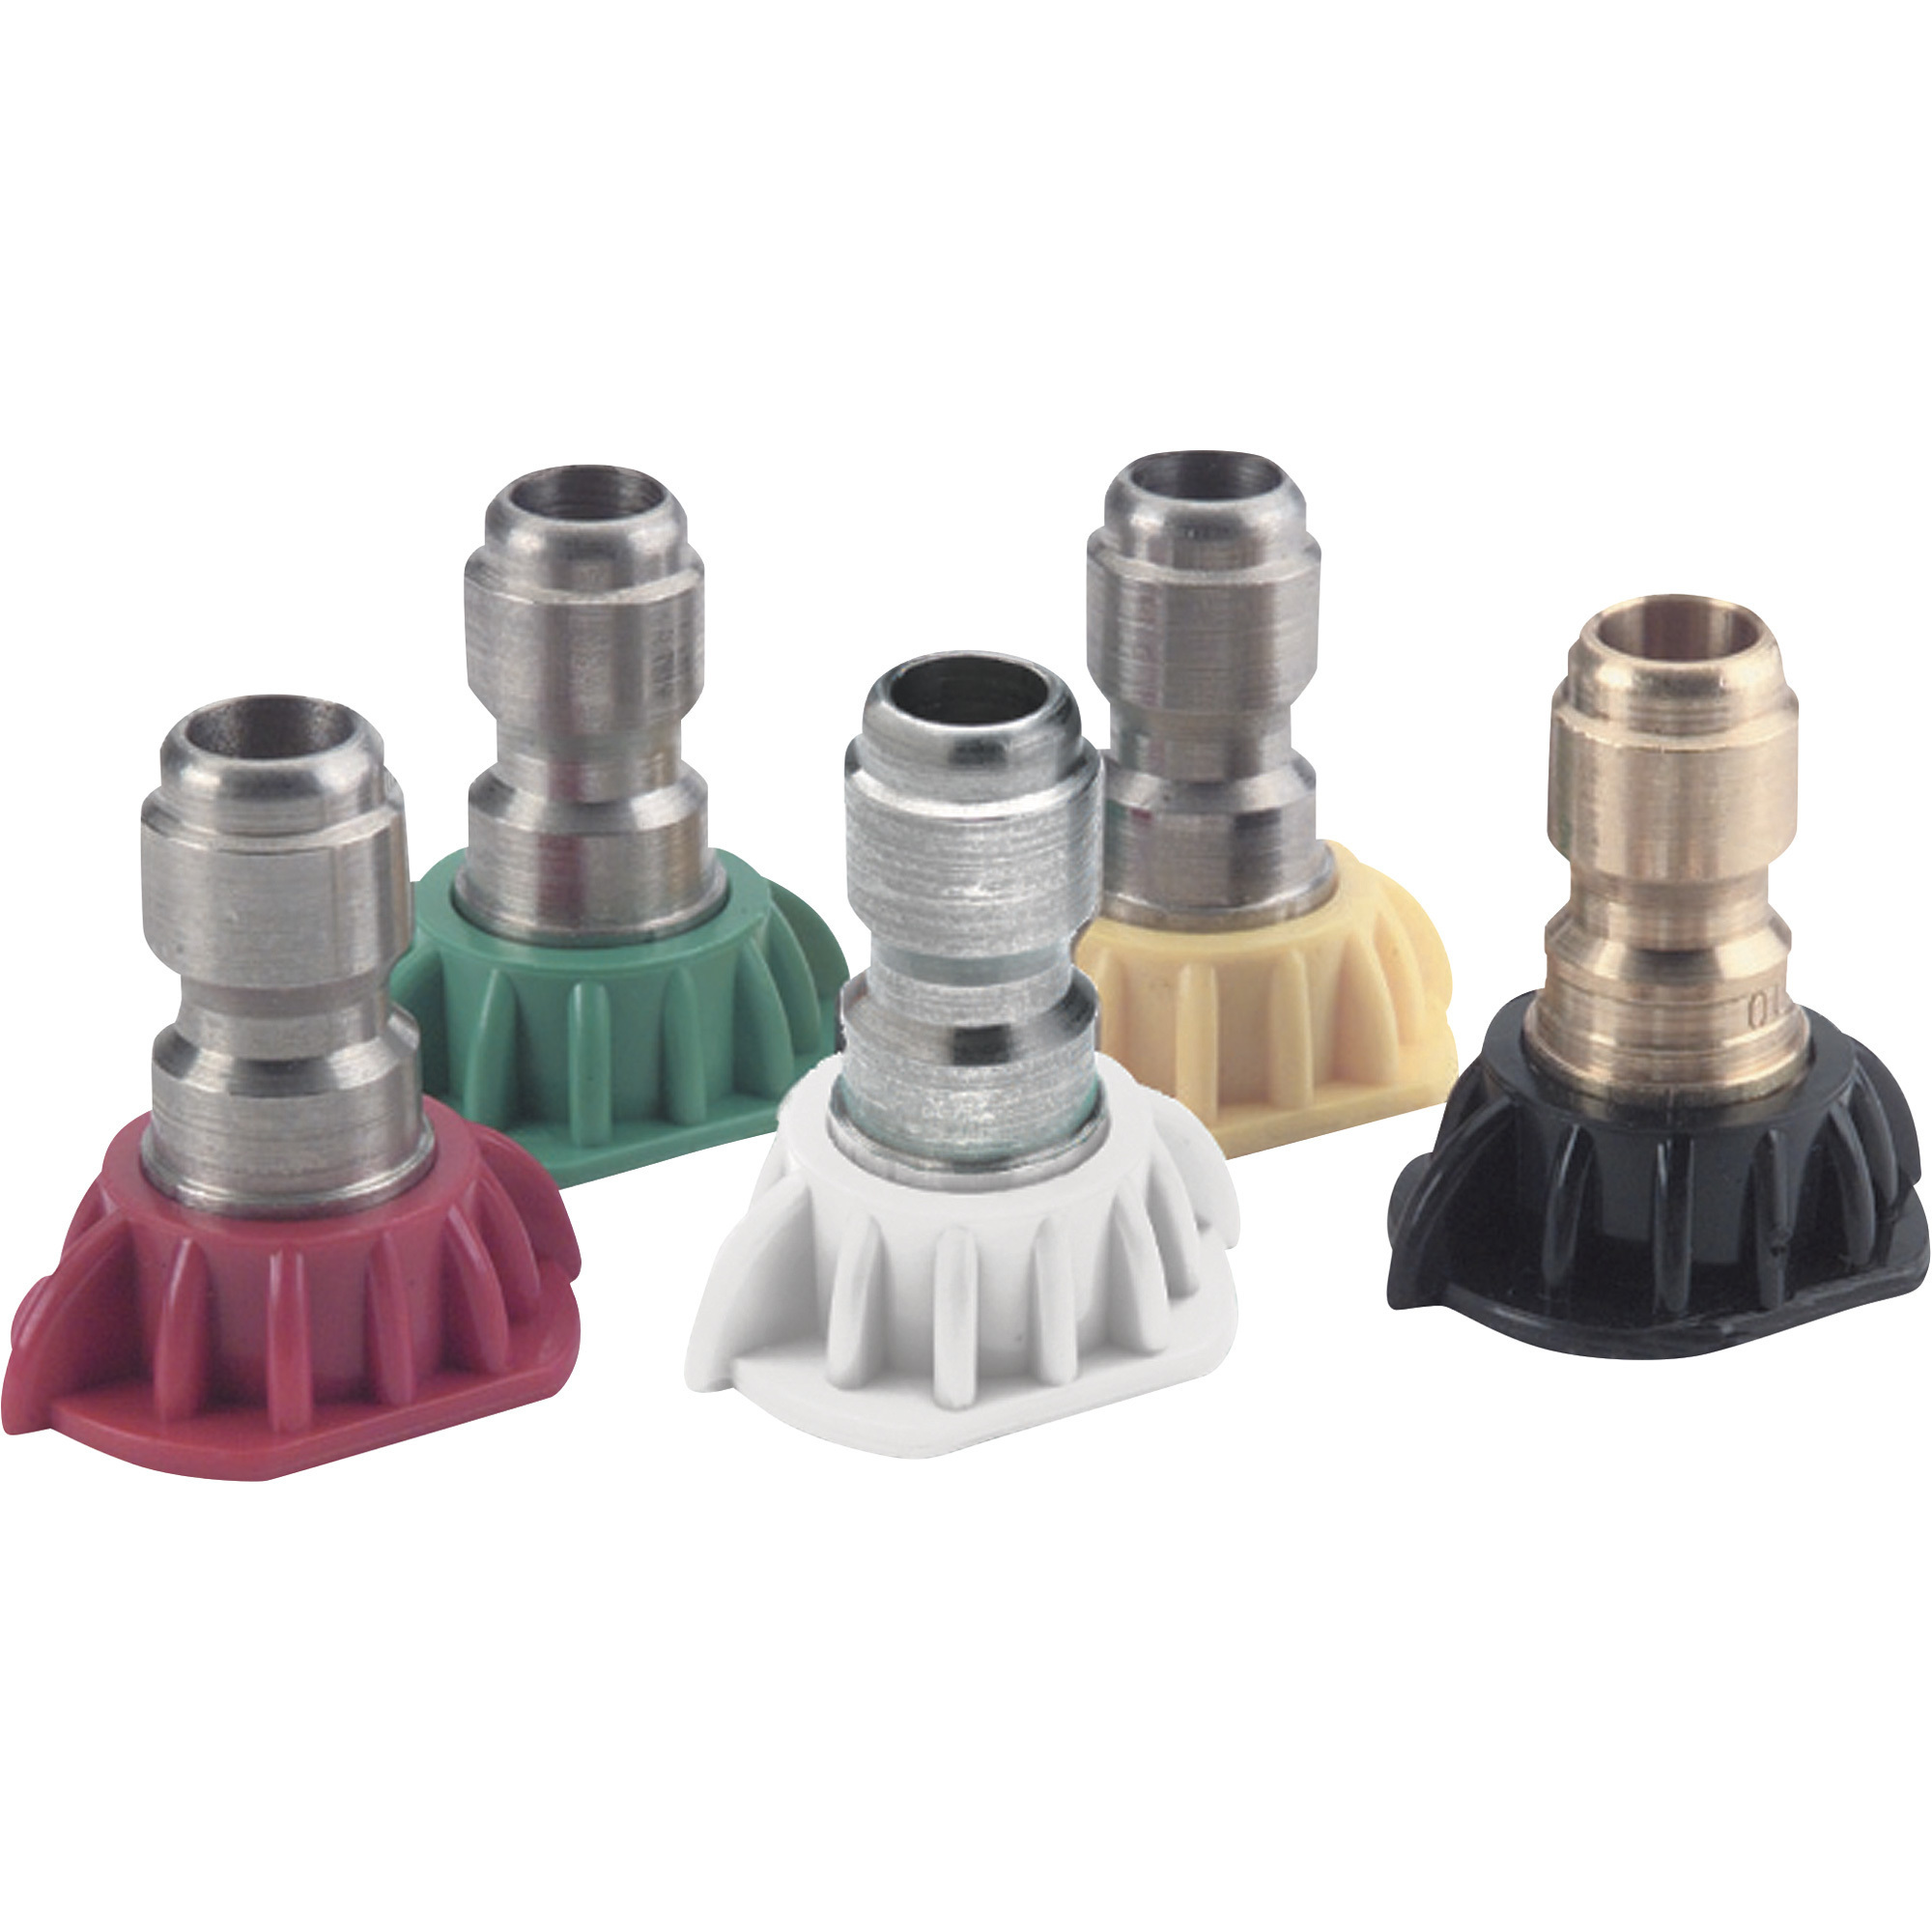 NorthStar 5-Pack Pressure Washer Quick Couple Nozzle Set â 2.0 Size, Model N105188P